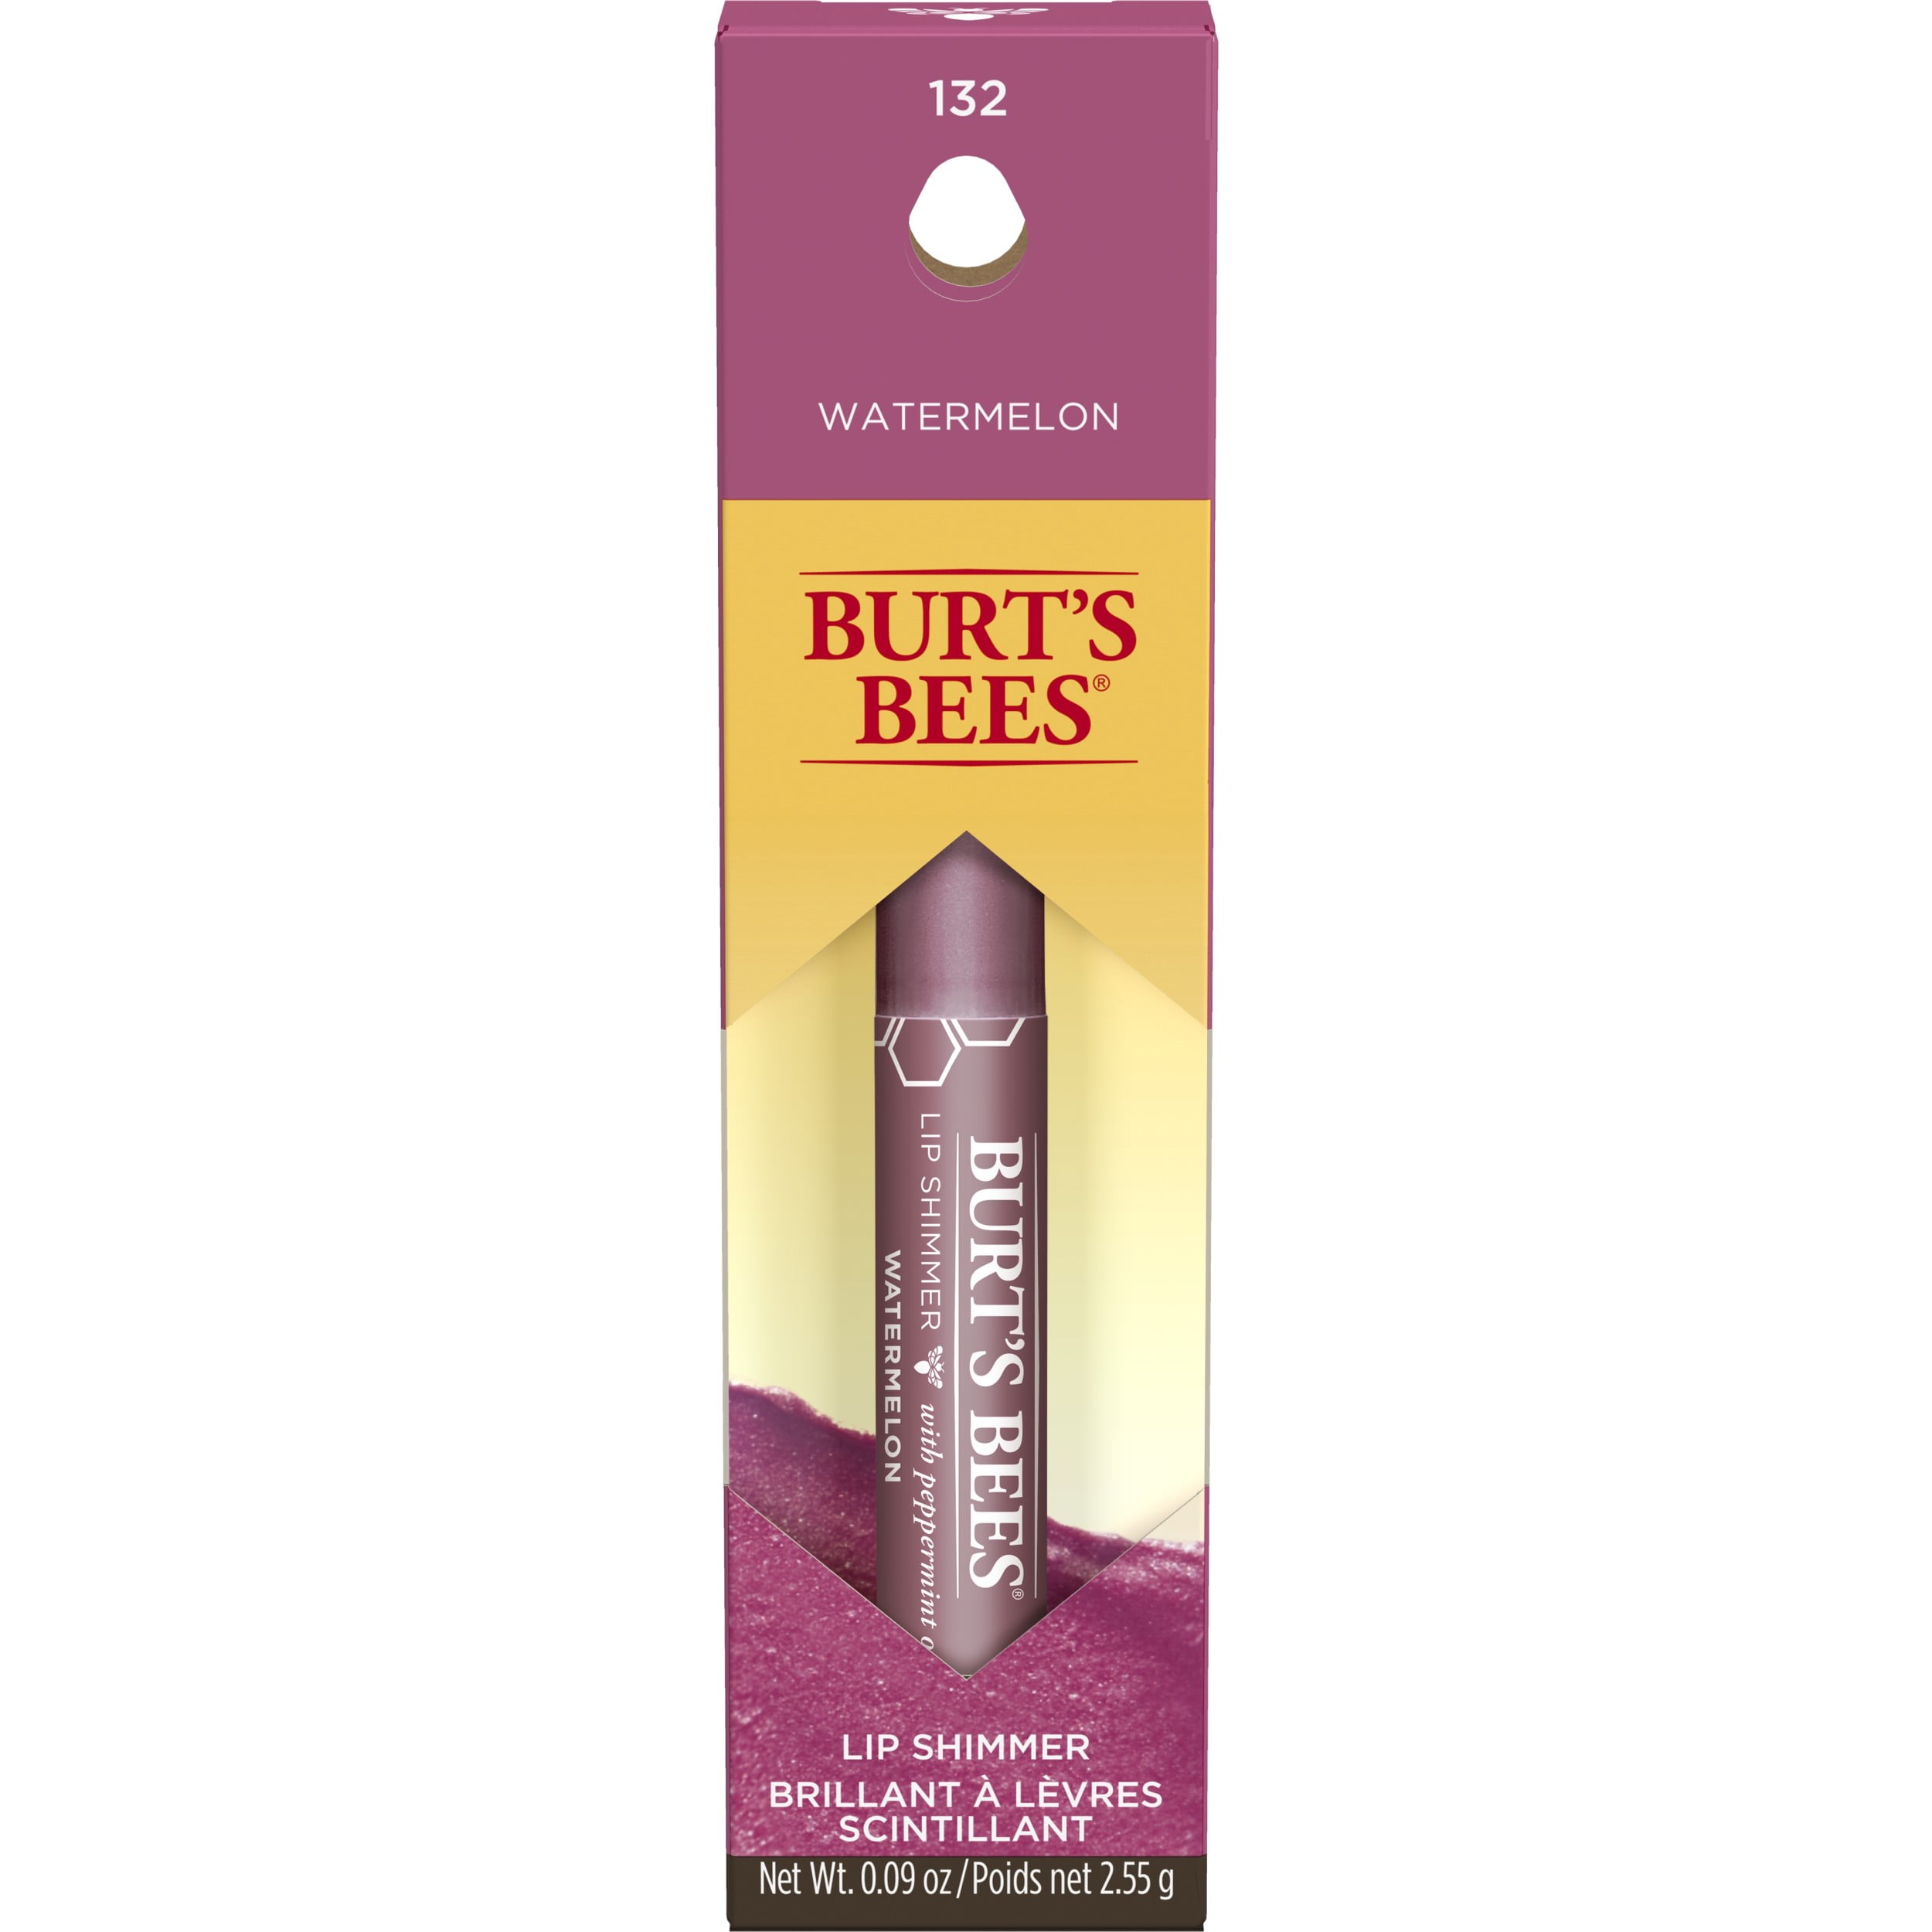 Burt's Bees 100% Natural  Moisturizing Lip Shimmer with Beeswax, Watermelon, 1 Tube